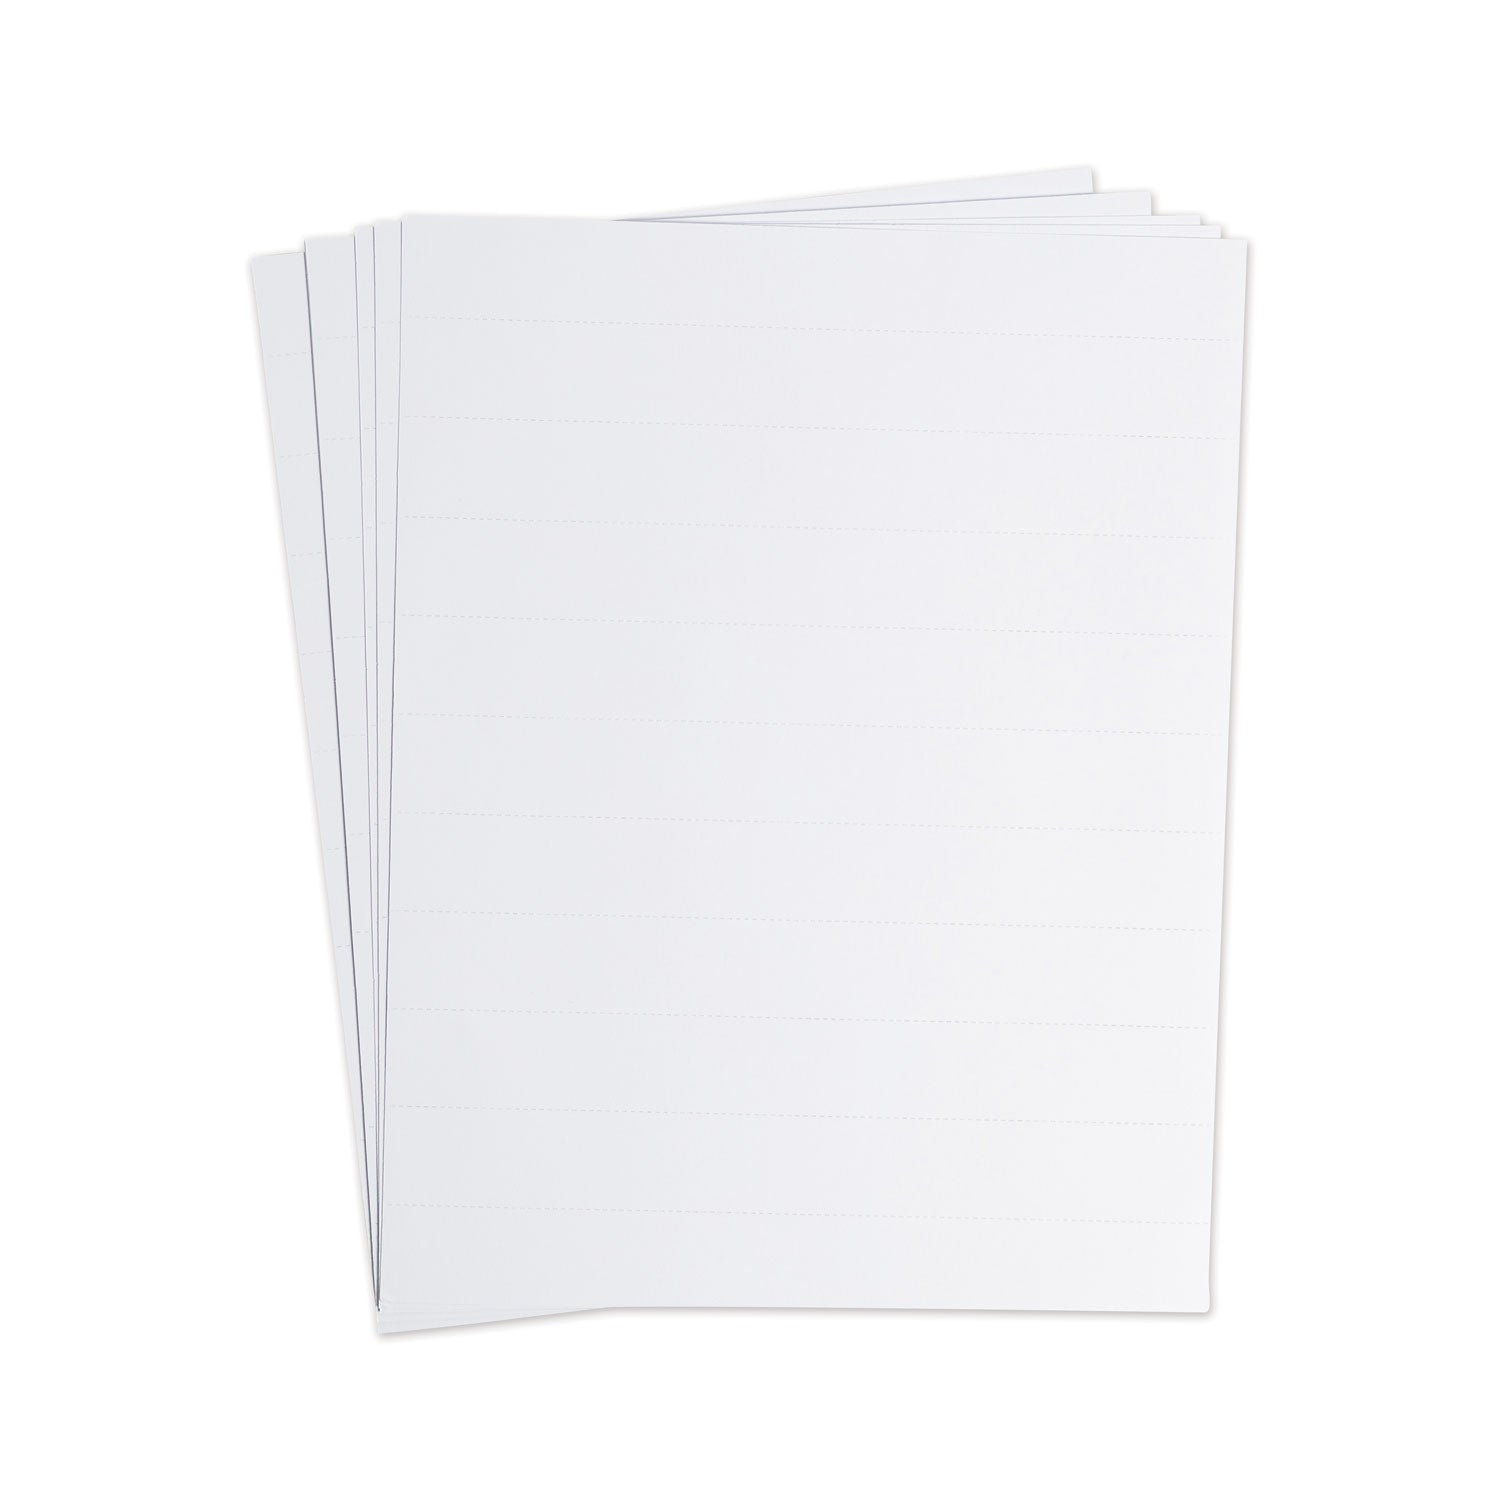 data-card-replacement-sheet-85-x-11-sheets-perforated-at-1-white-10-pack_ubrfm1615 - 2